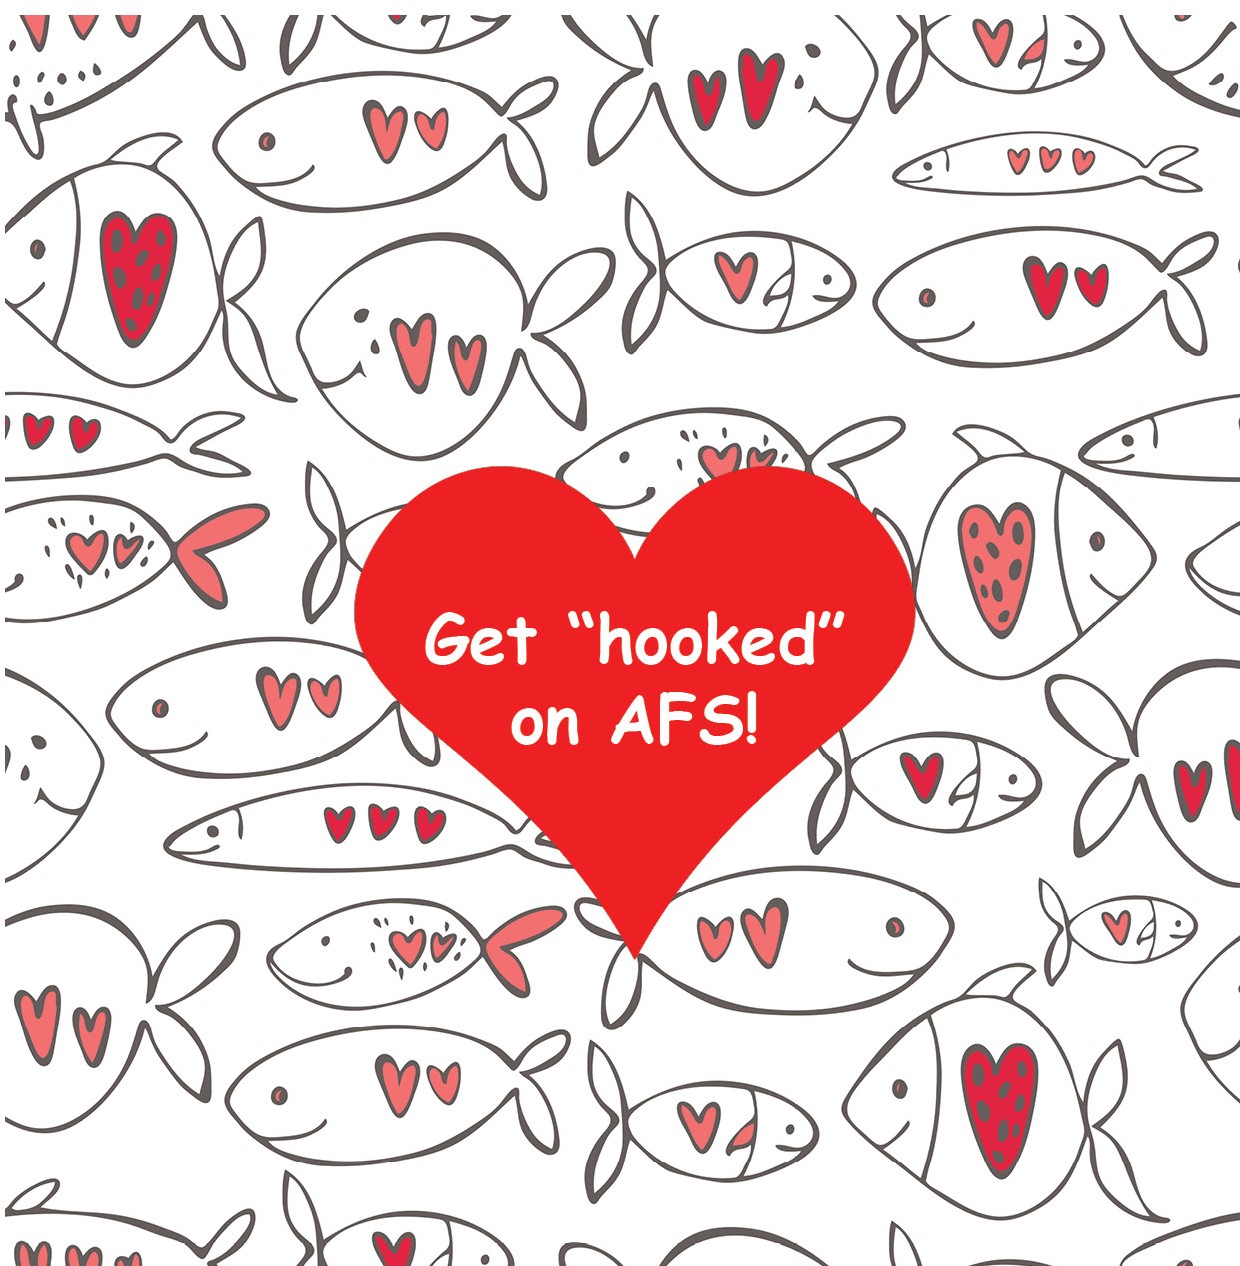 Get hooked on AFS